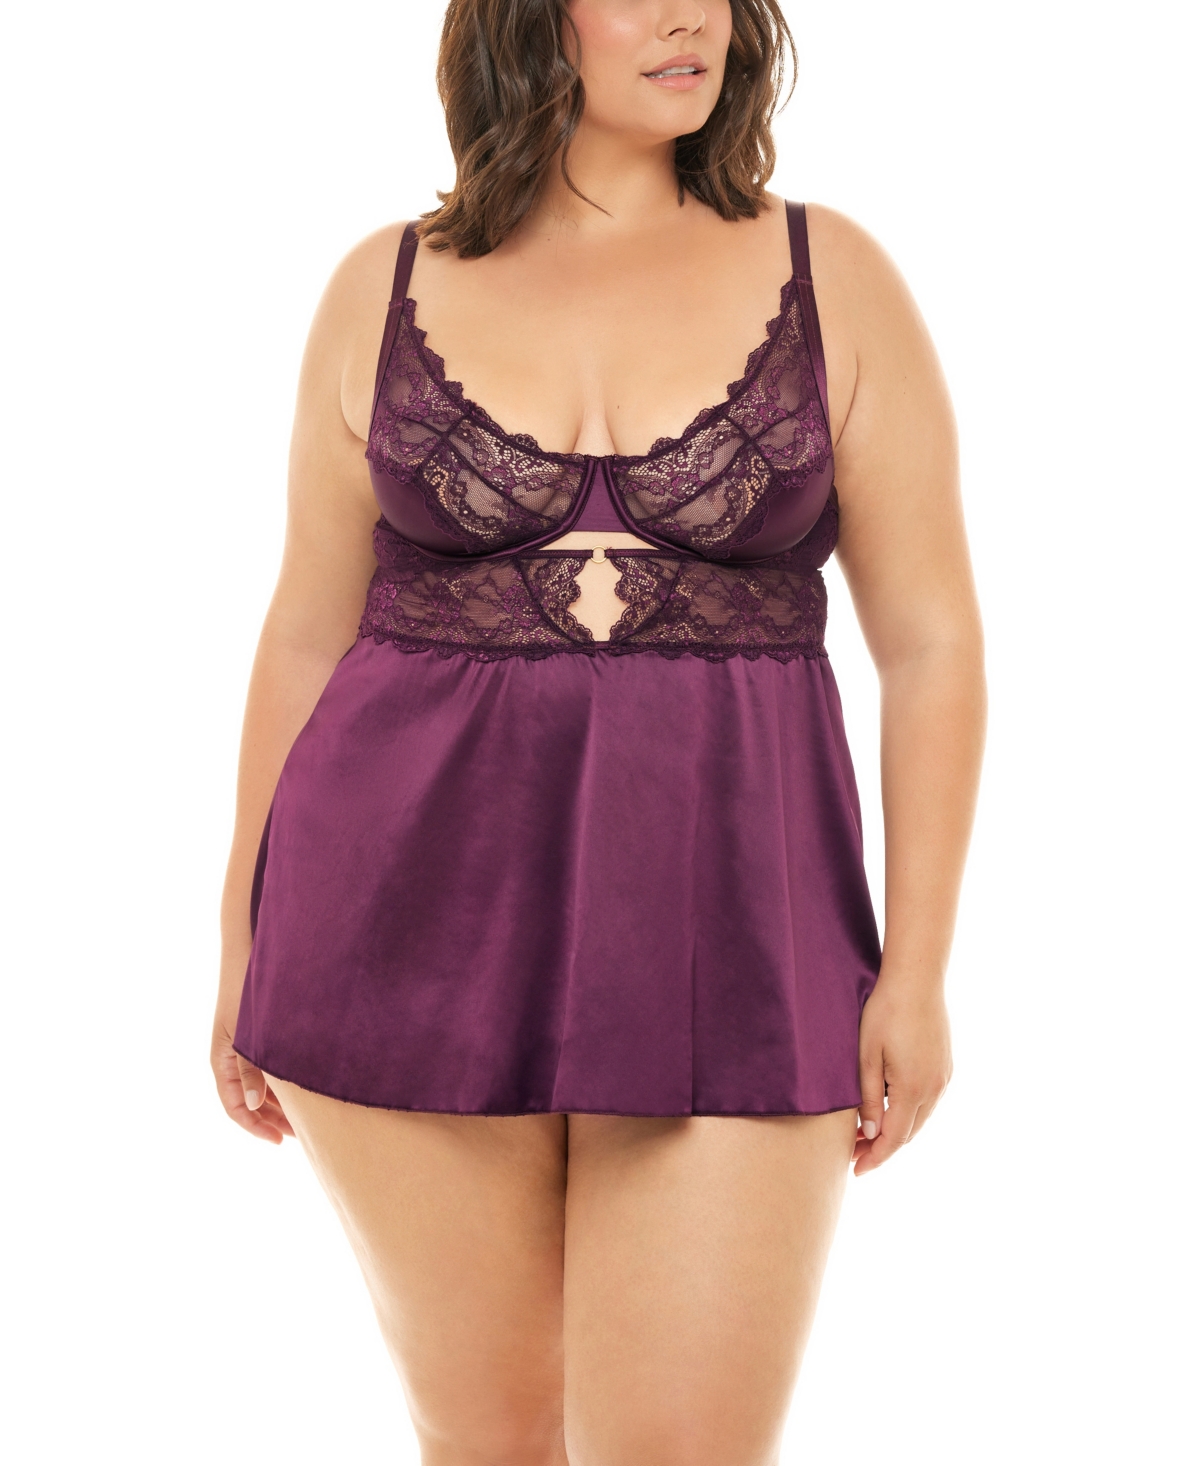 Plus Size Donna Delicate Lace and Satin Chemise with Keyhole Details - Potent Purple